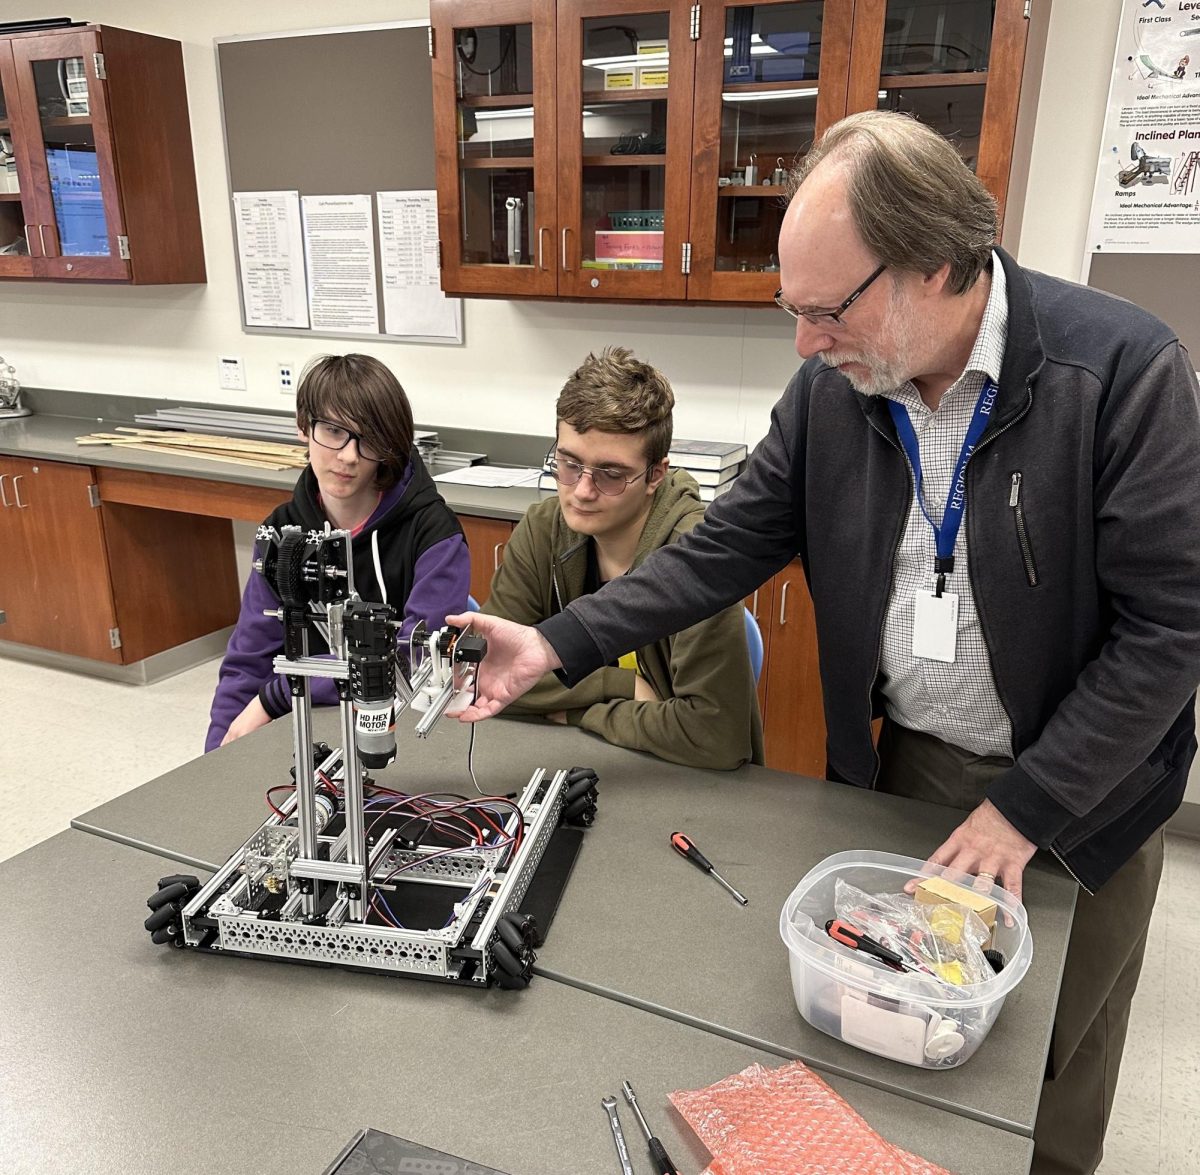 William+Pease%2C+Nonnewaug+science+faculty+and+club+advisor+for+robotics%2C+attaches+crucial+pieces+onto+this+robot+with+freshmen+Collin+Palaia%2C+left%2C+and+Jack+Braddock.